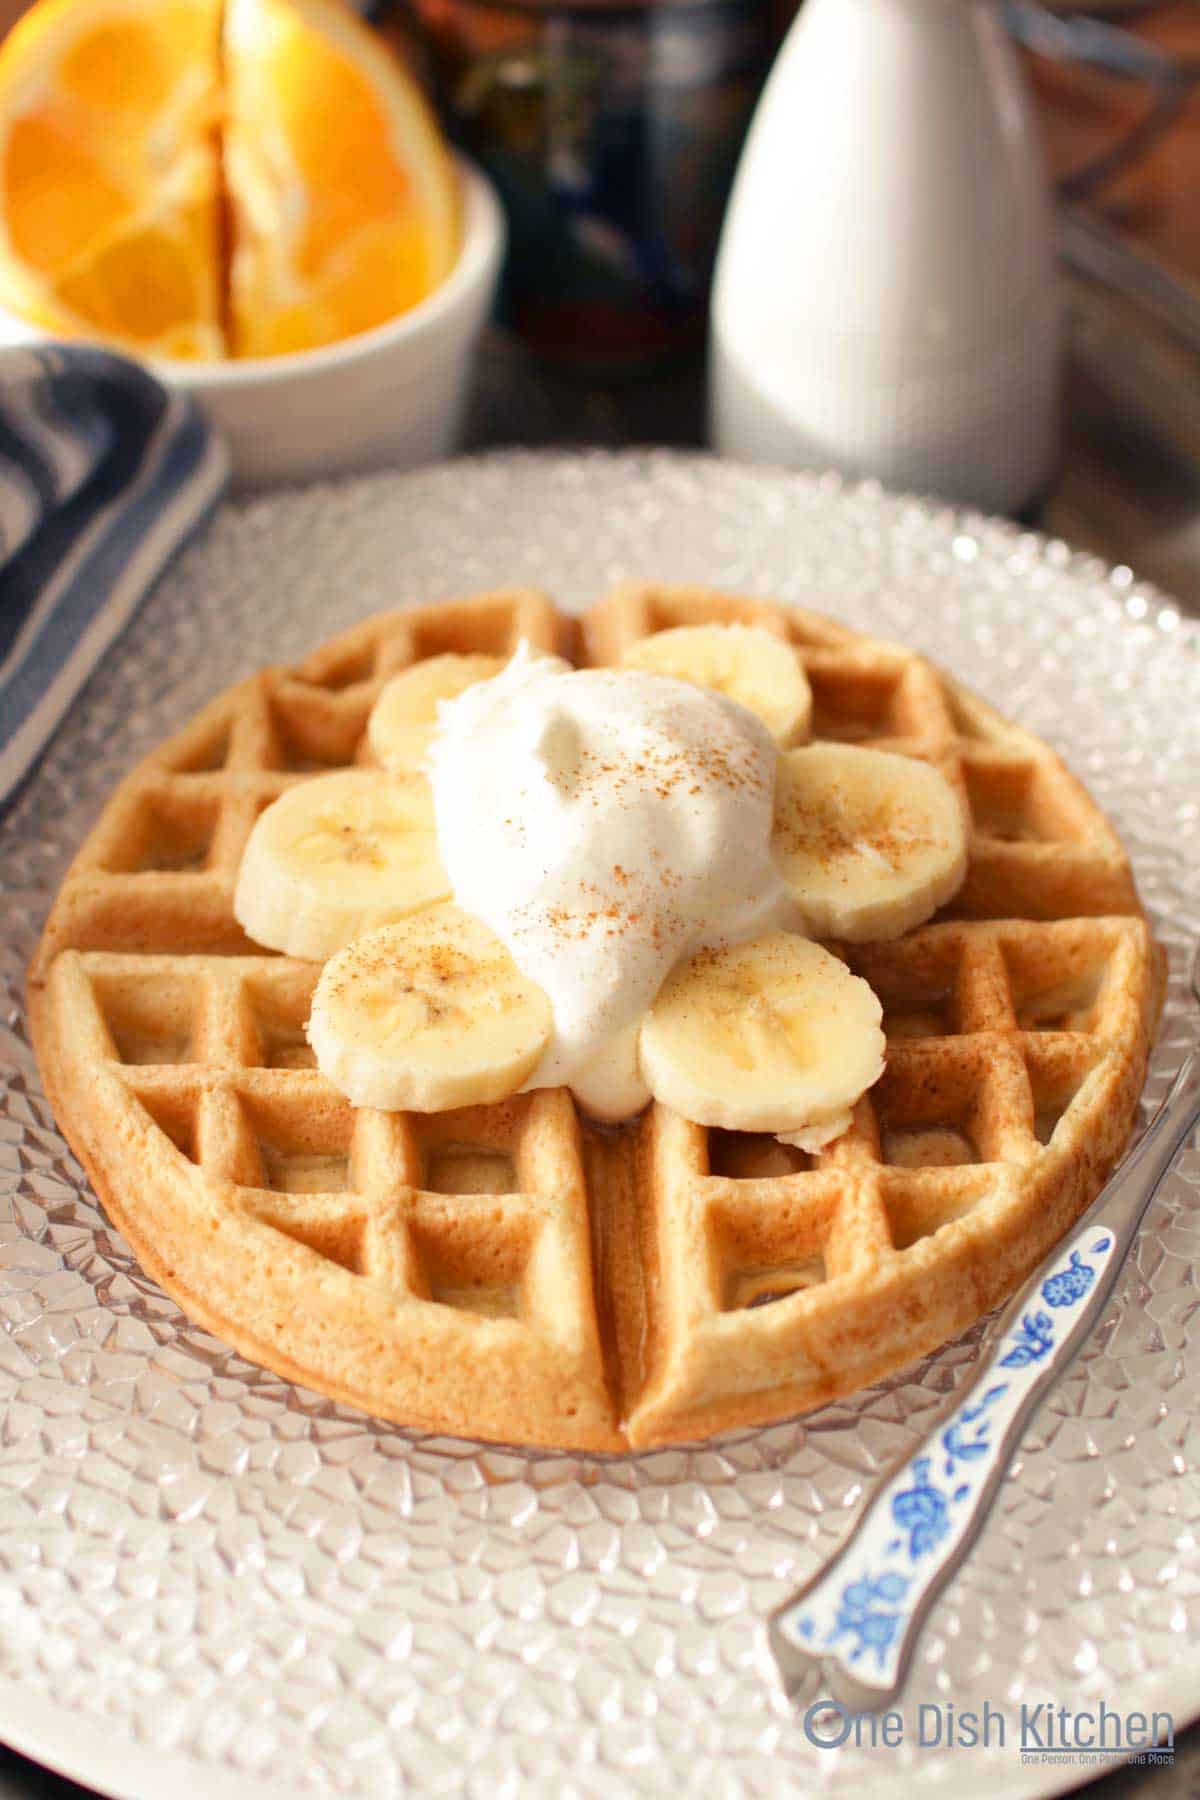 A waffle topped with whipped cream, banana slices, and dusted with cinnamon on a large plate with a fork.